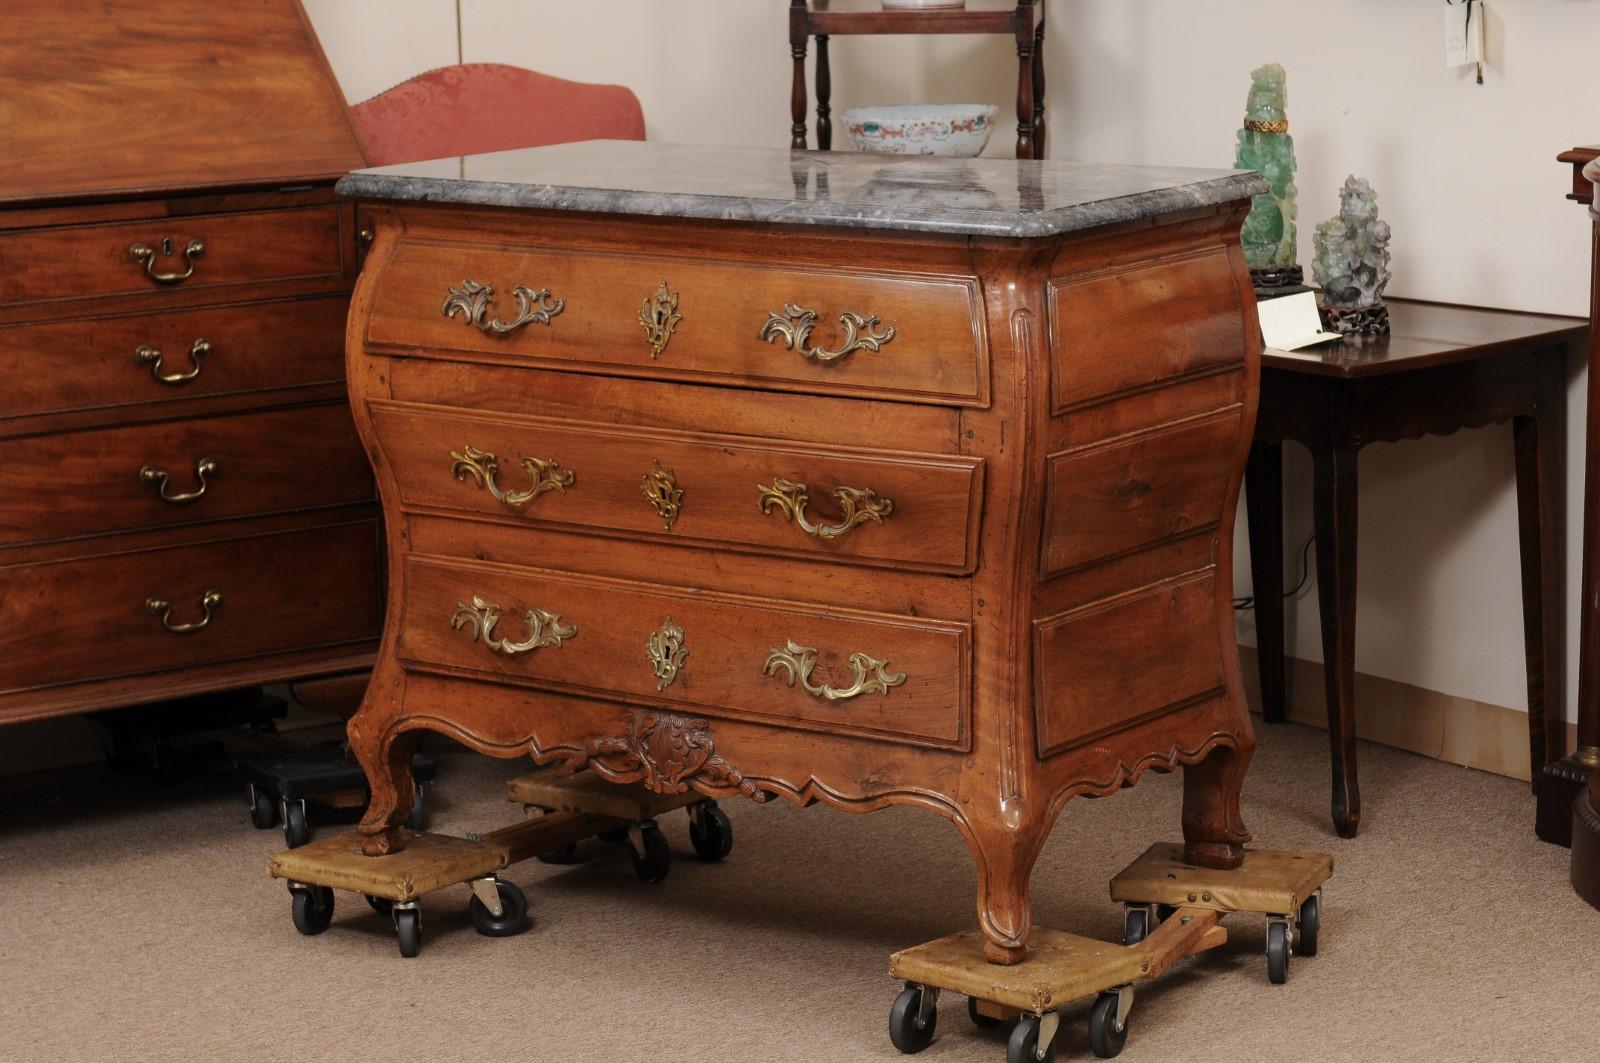  Mid 18th Century French Louis XV Walnut Commode w/ Bombe Form & Grey Marble Top For Sale 8